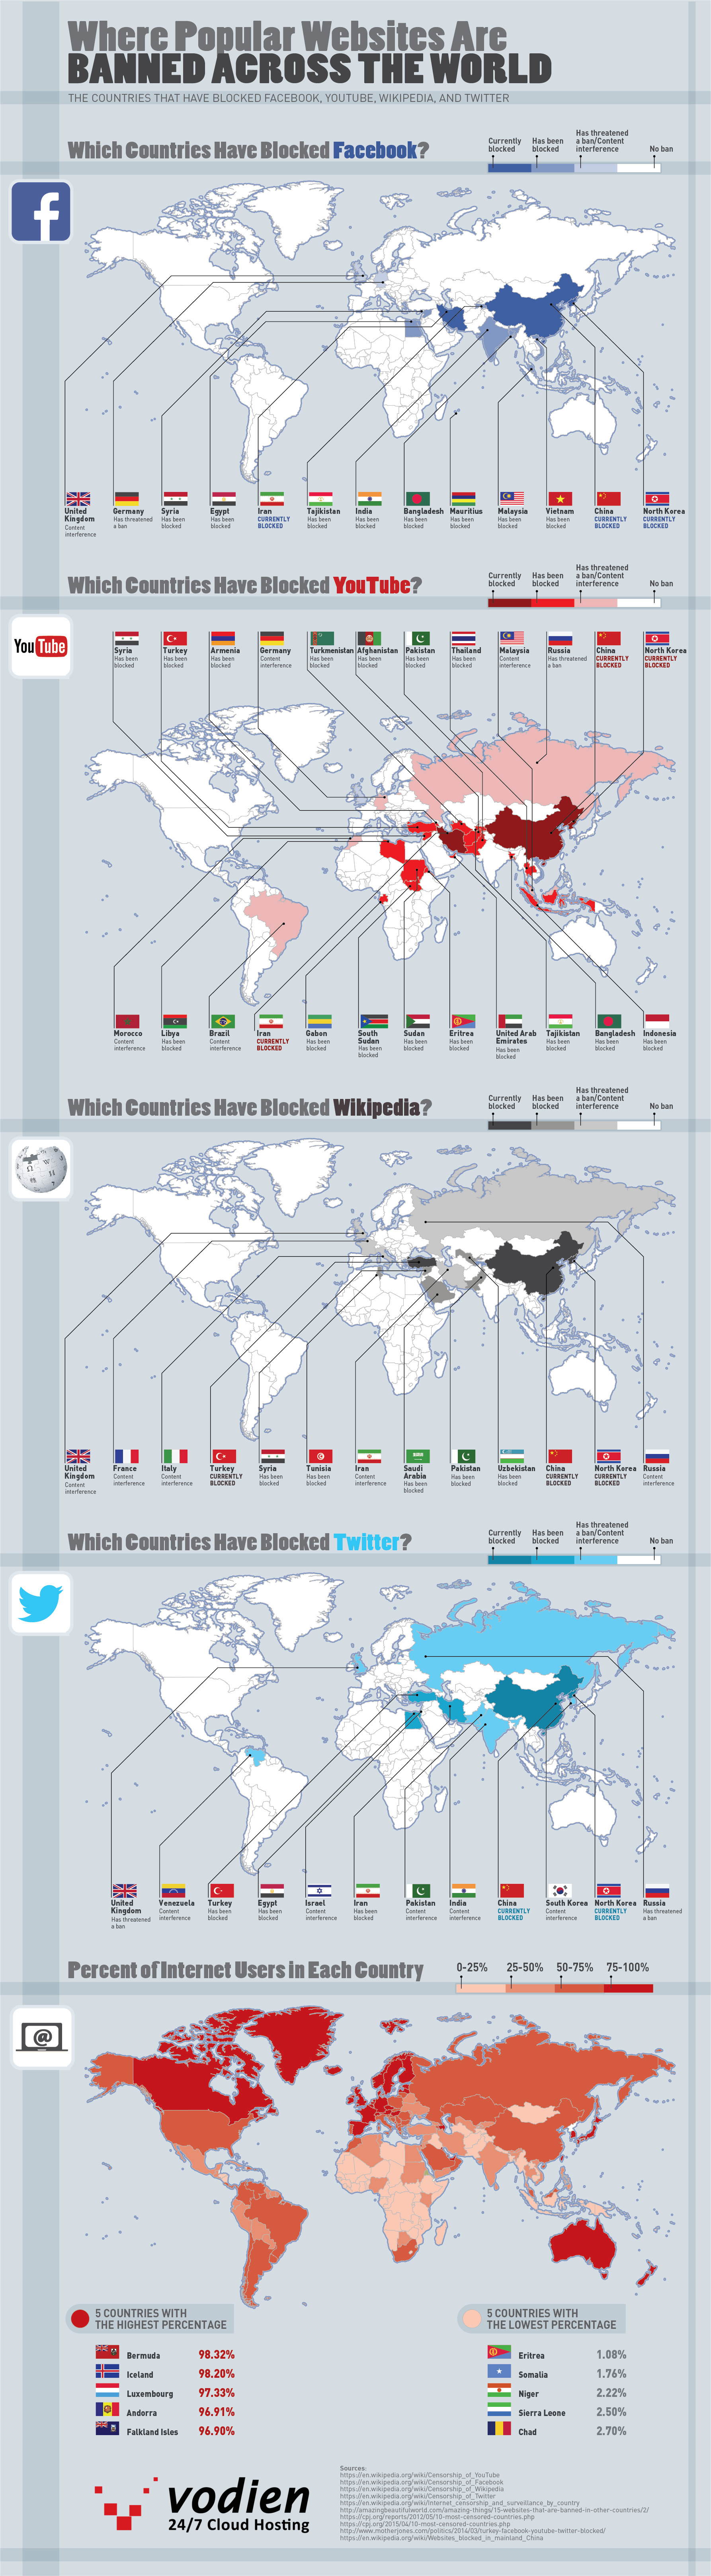 Where Popular Websites Are Banned Across the World - Vodien.com- Infographic